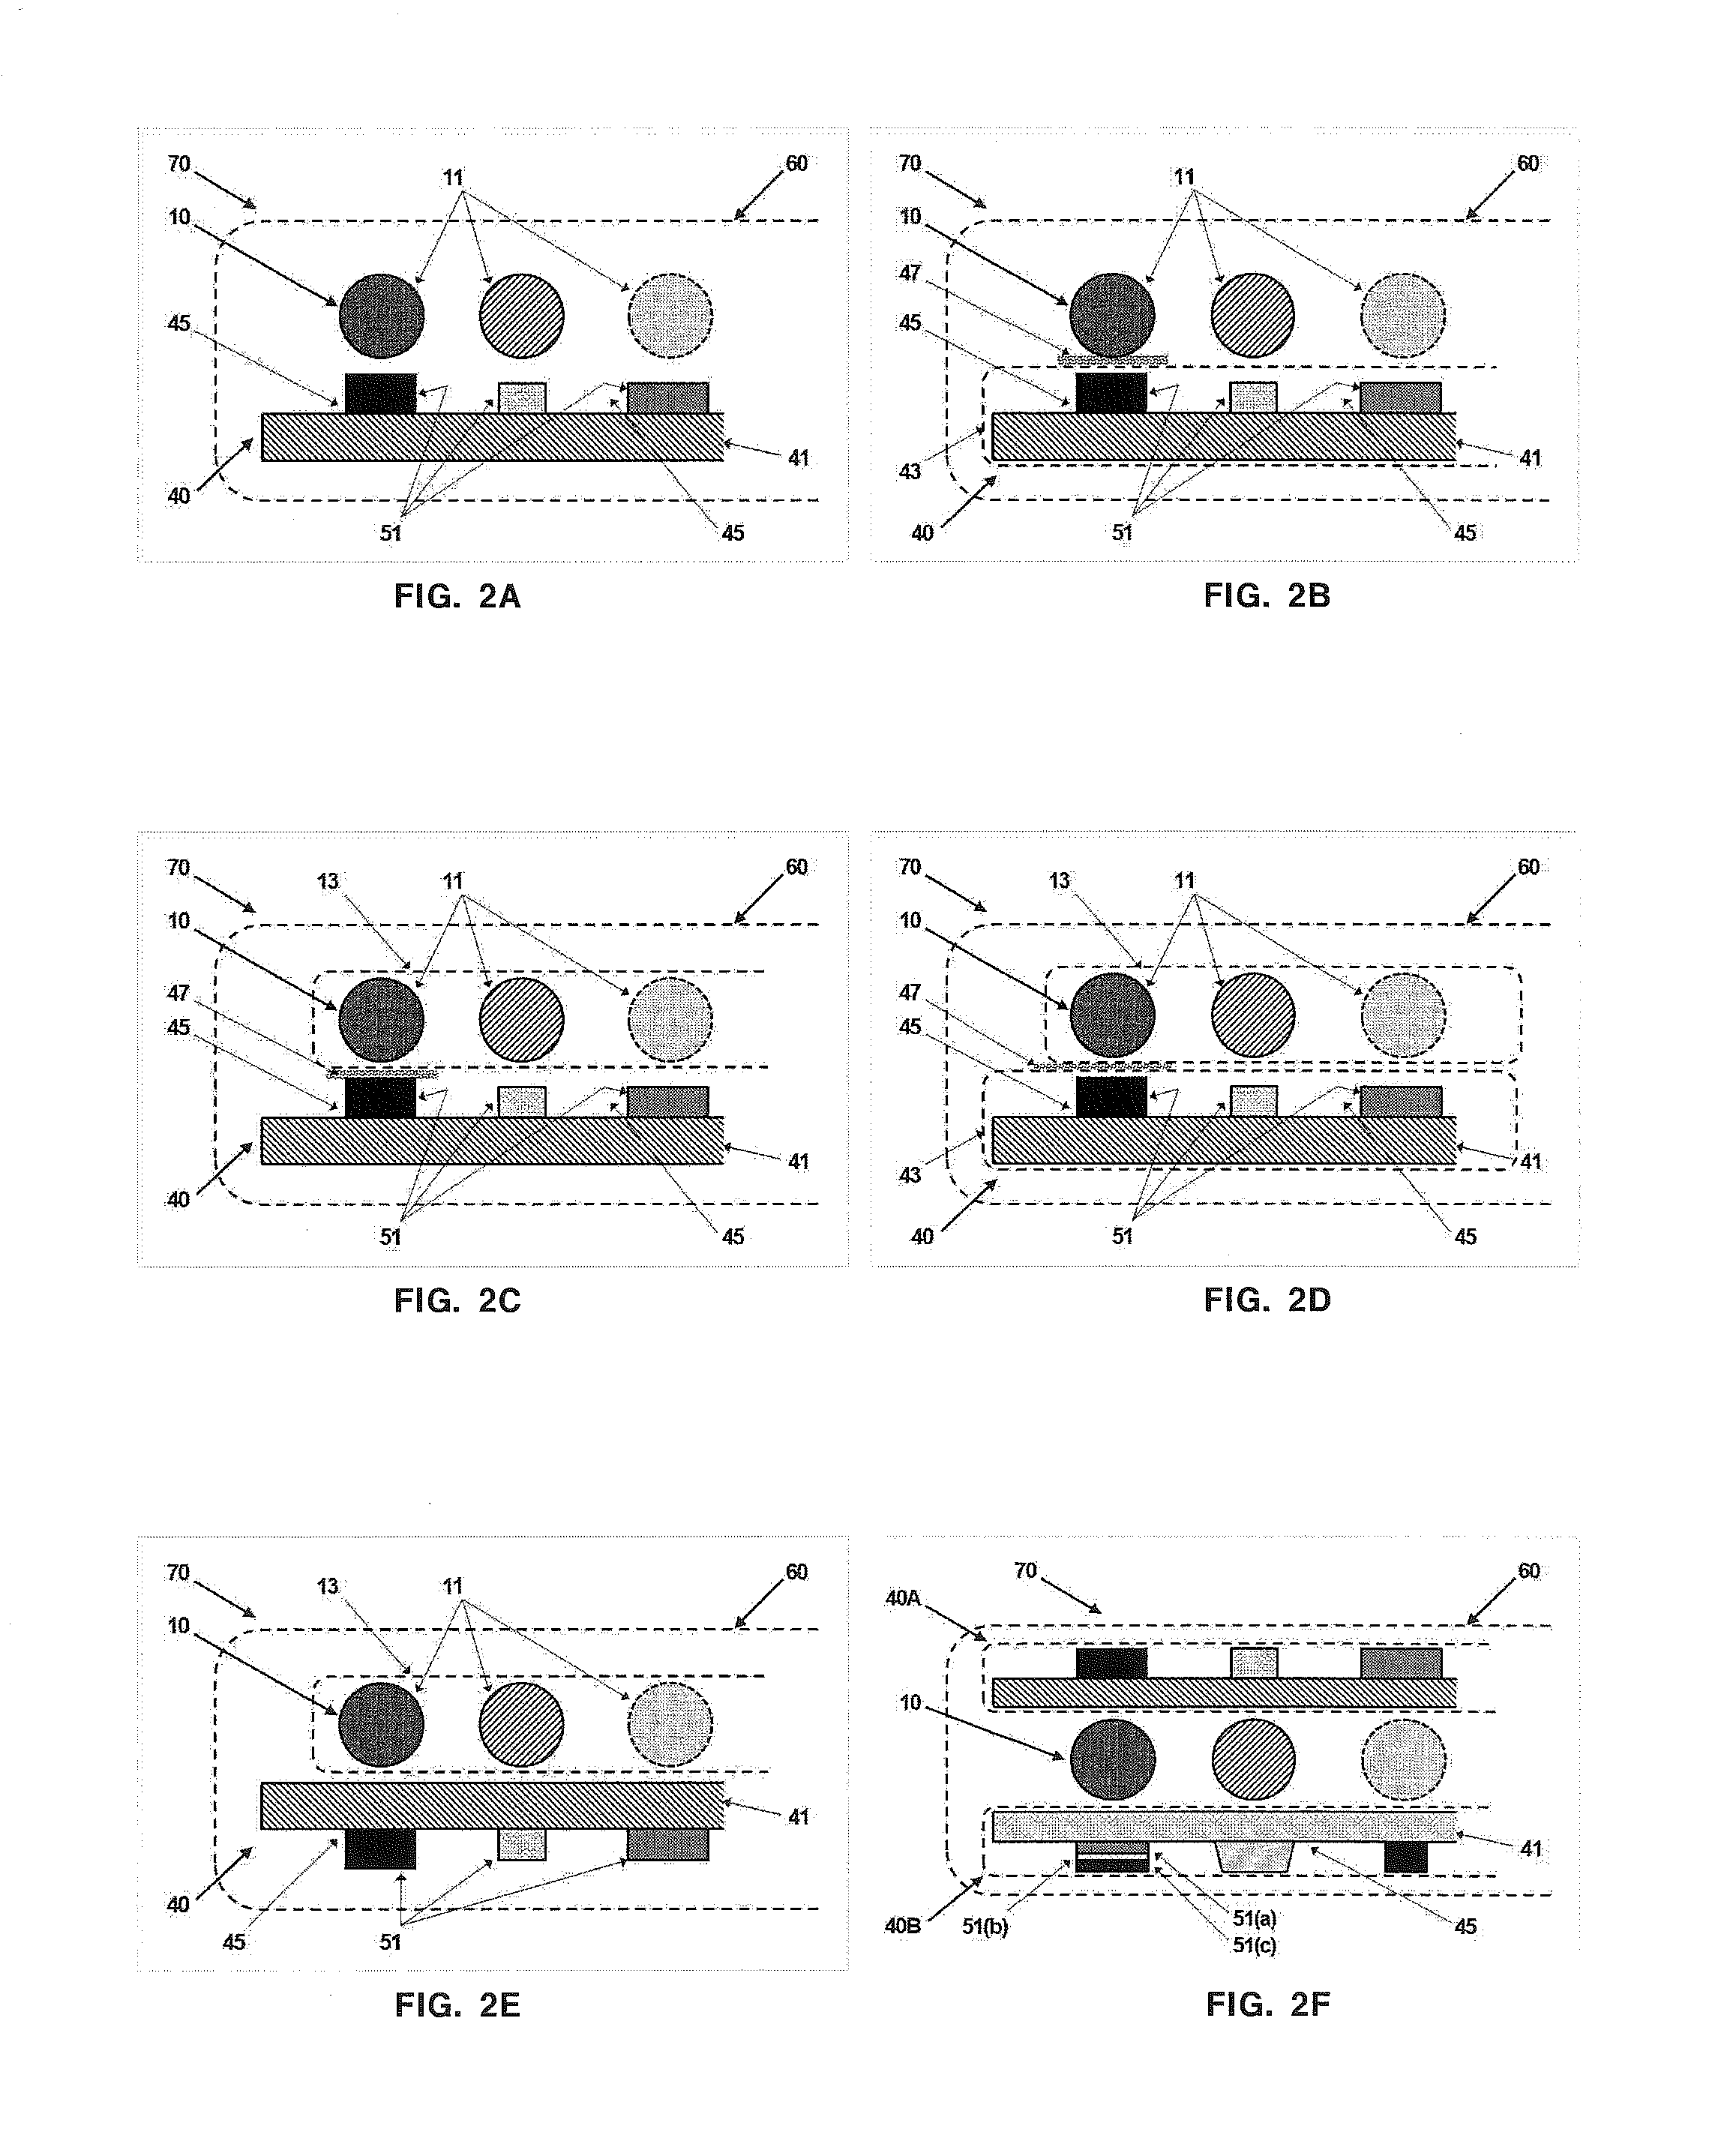 Flexible hybrid cable and methods of making and using such